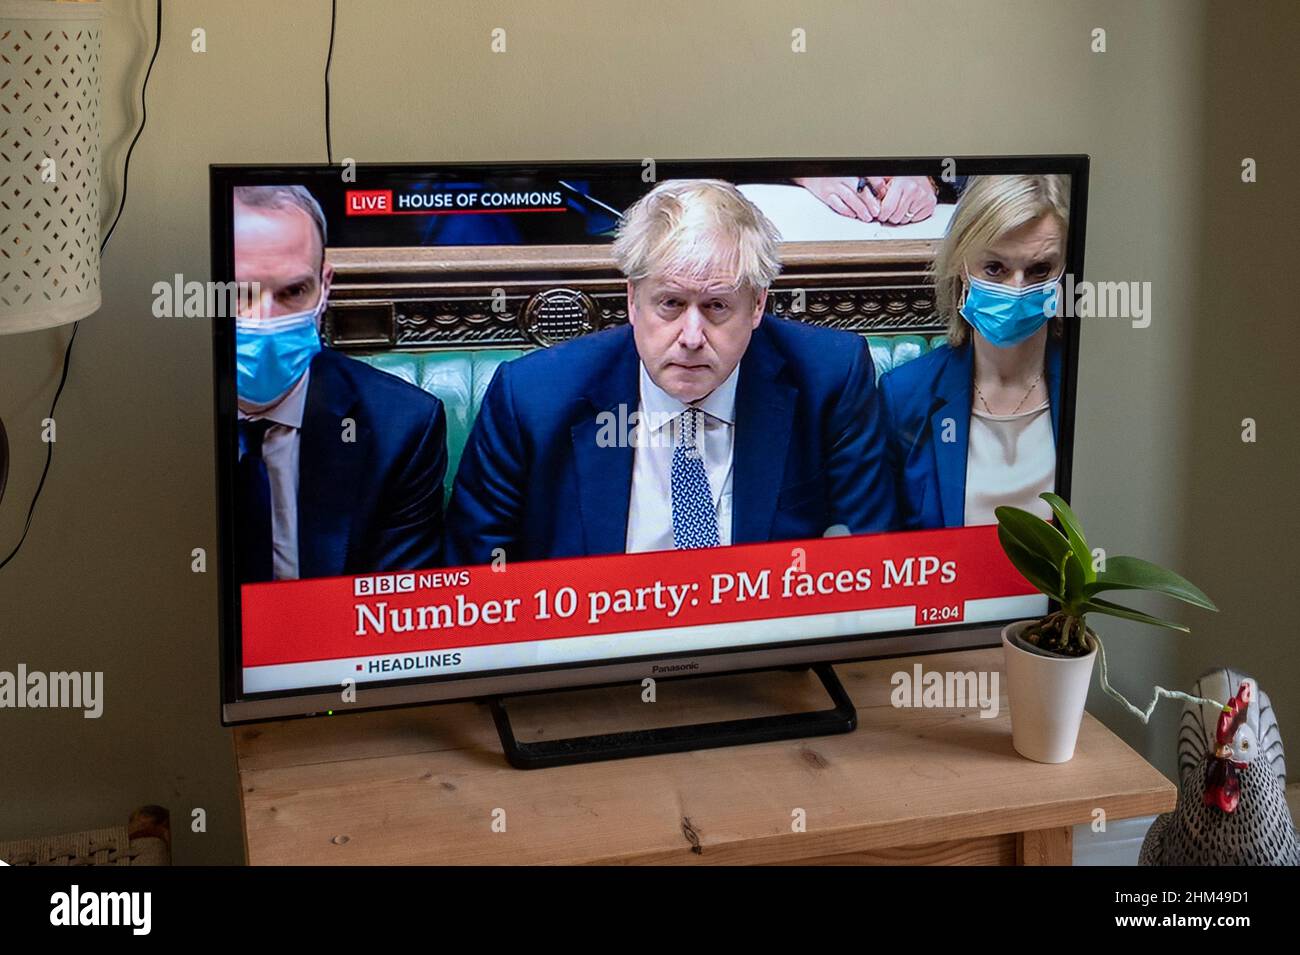 Prime Minister Boris Johnson on BBC news apologising to MPs in the Commons for breaking Covid rules with parties at 10 Downing Street. Stock Photo